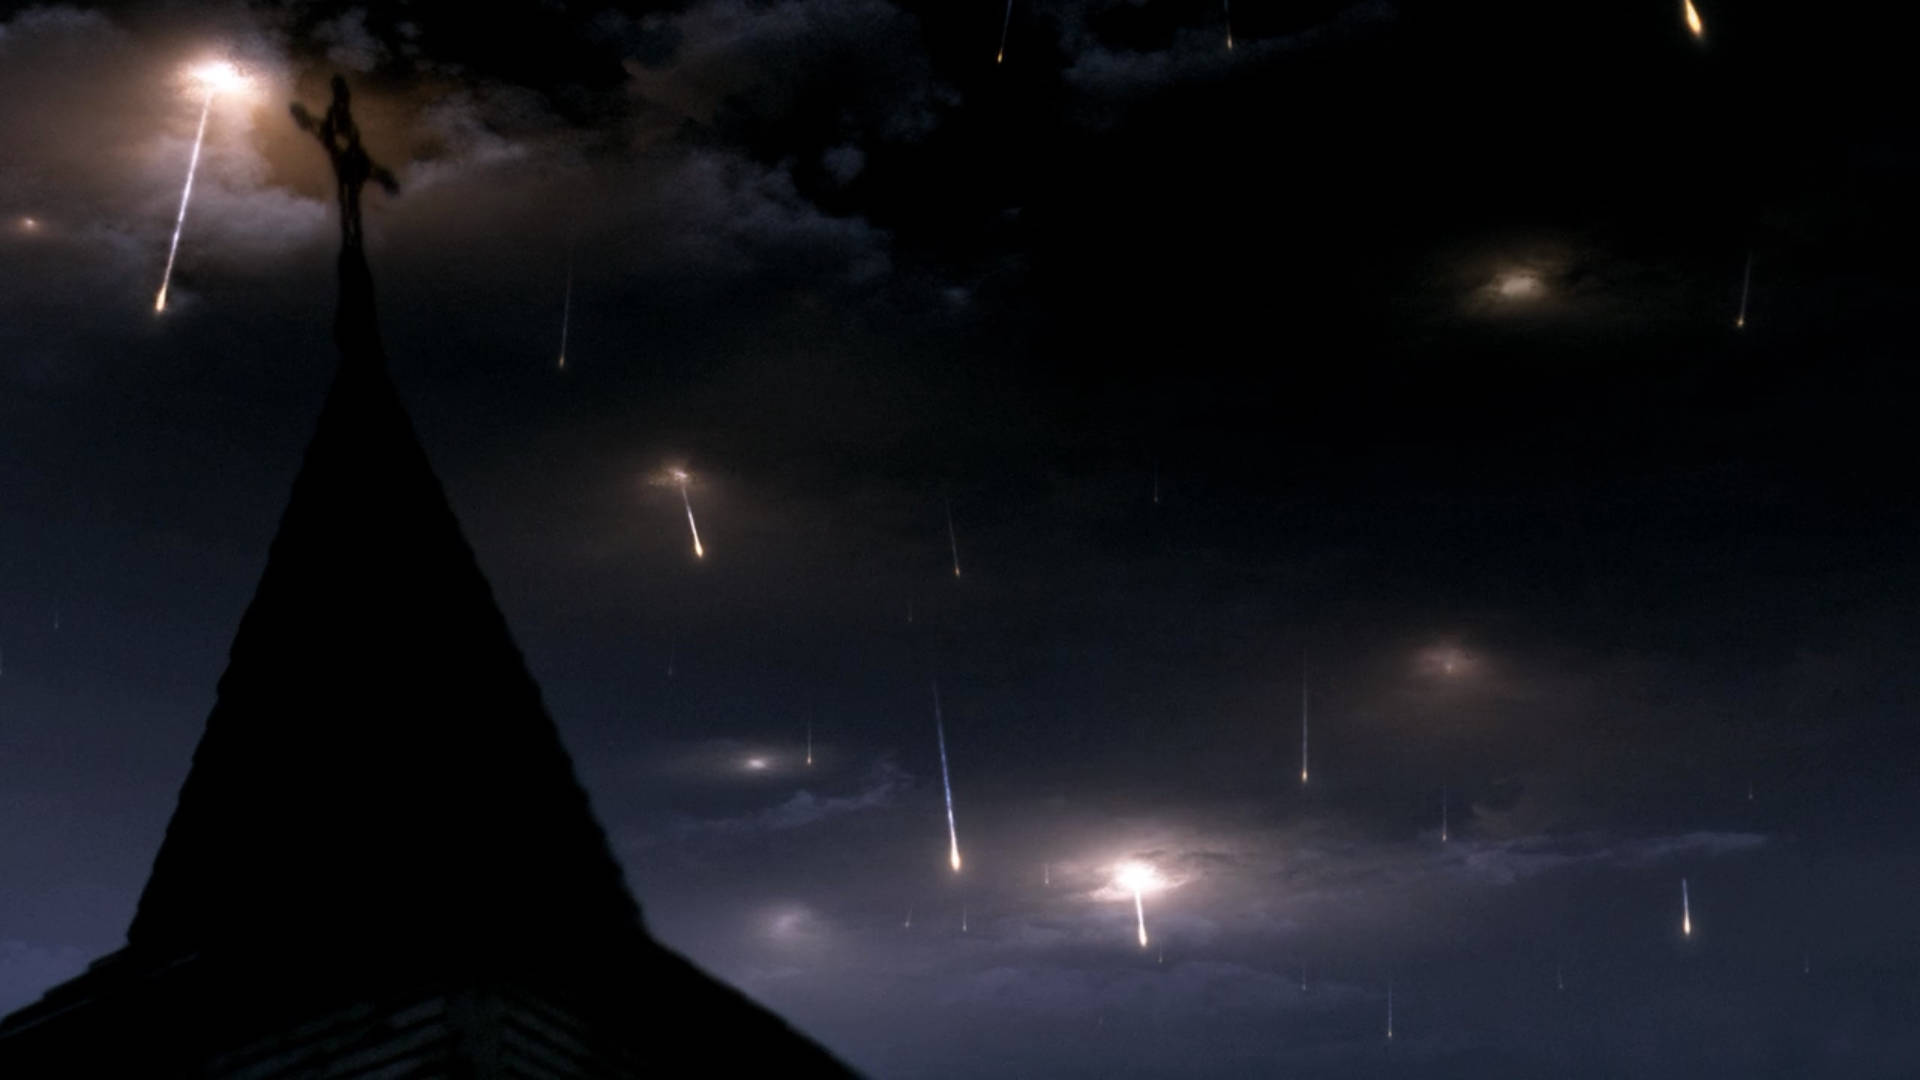 Supernatural Church Roof And Meteors Background